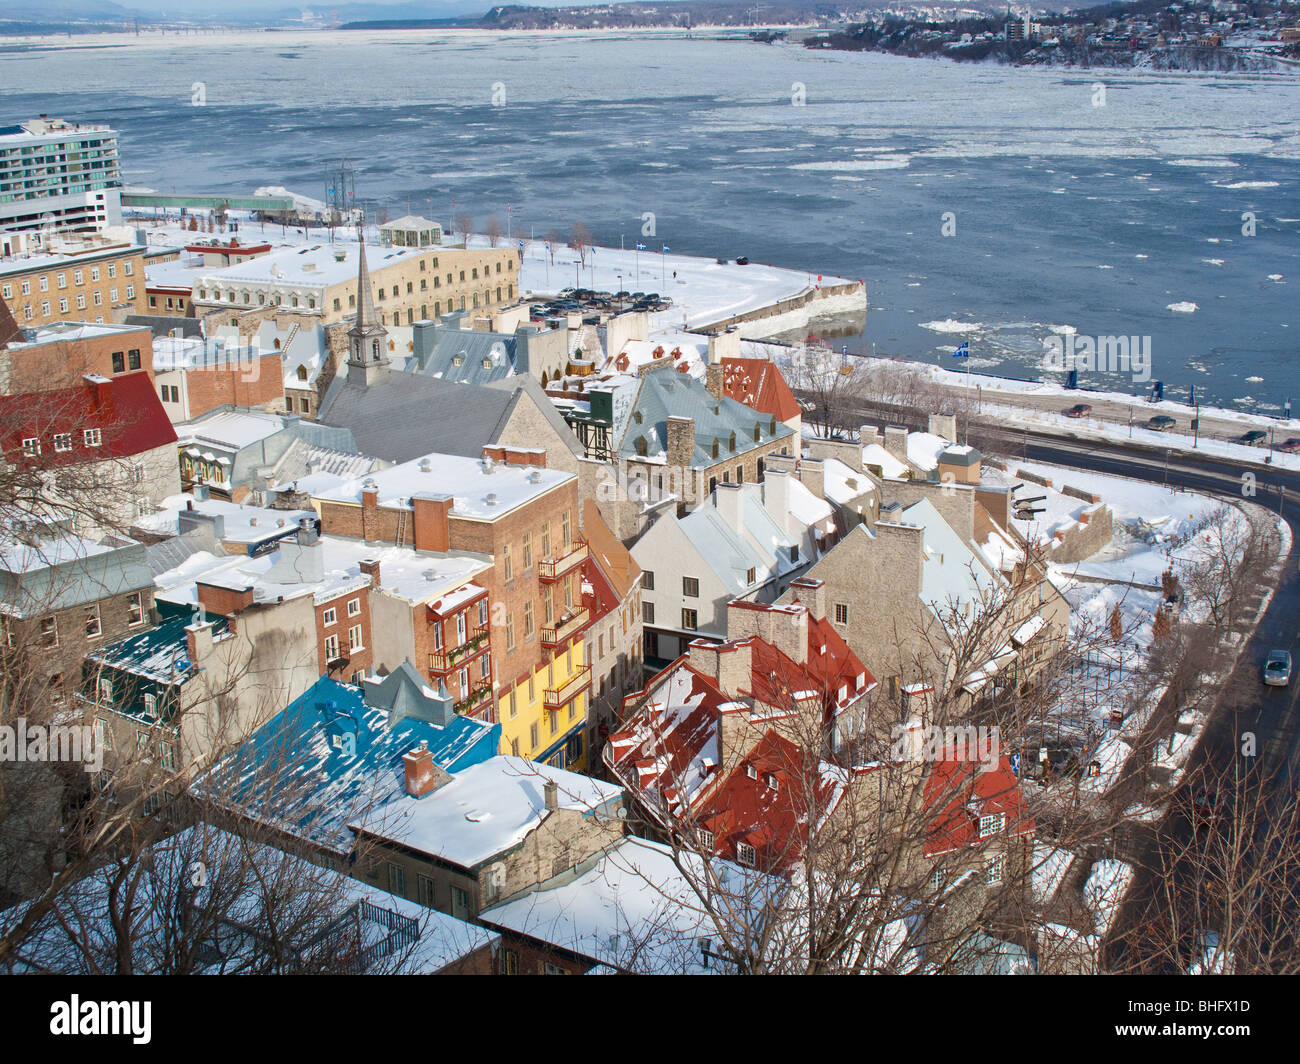 View of the old city of Quebec above the icy waters of the st. lawrence river in wintertime canada Stock Photo